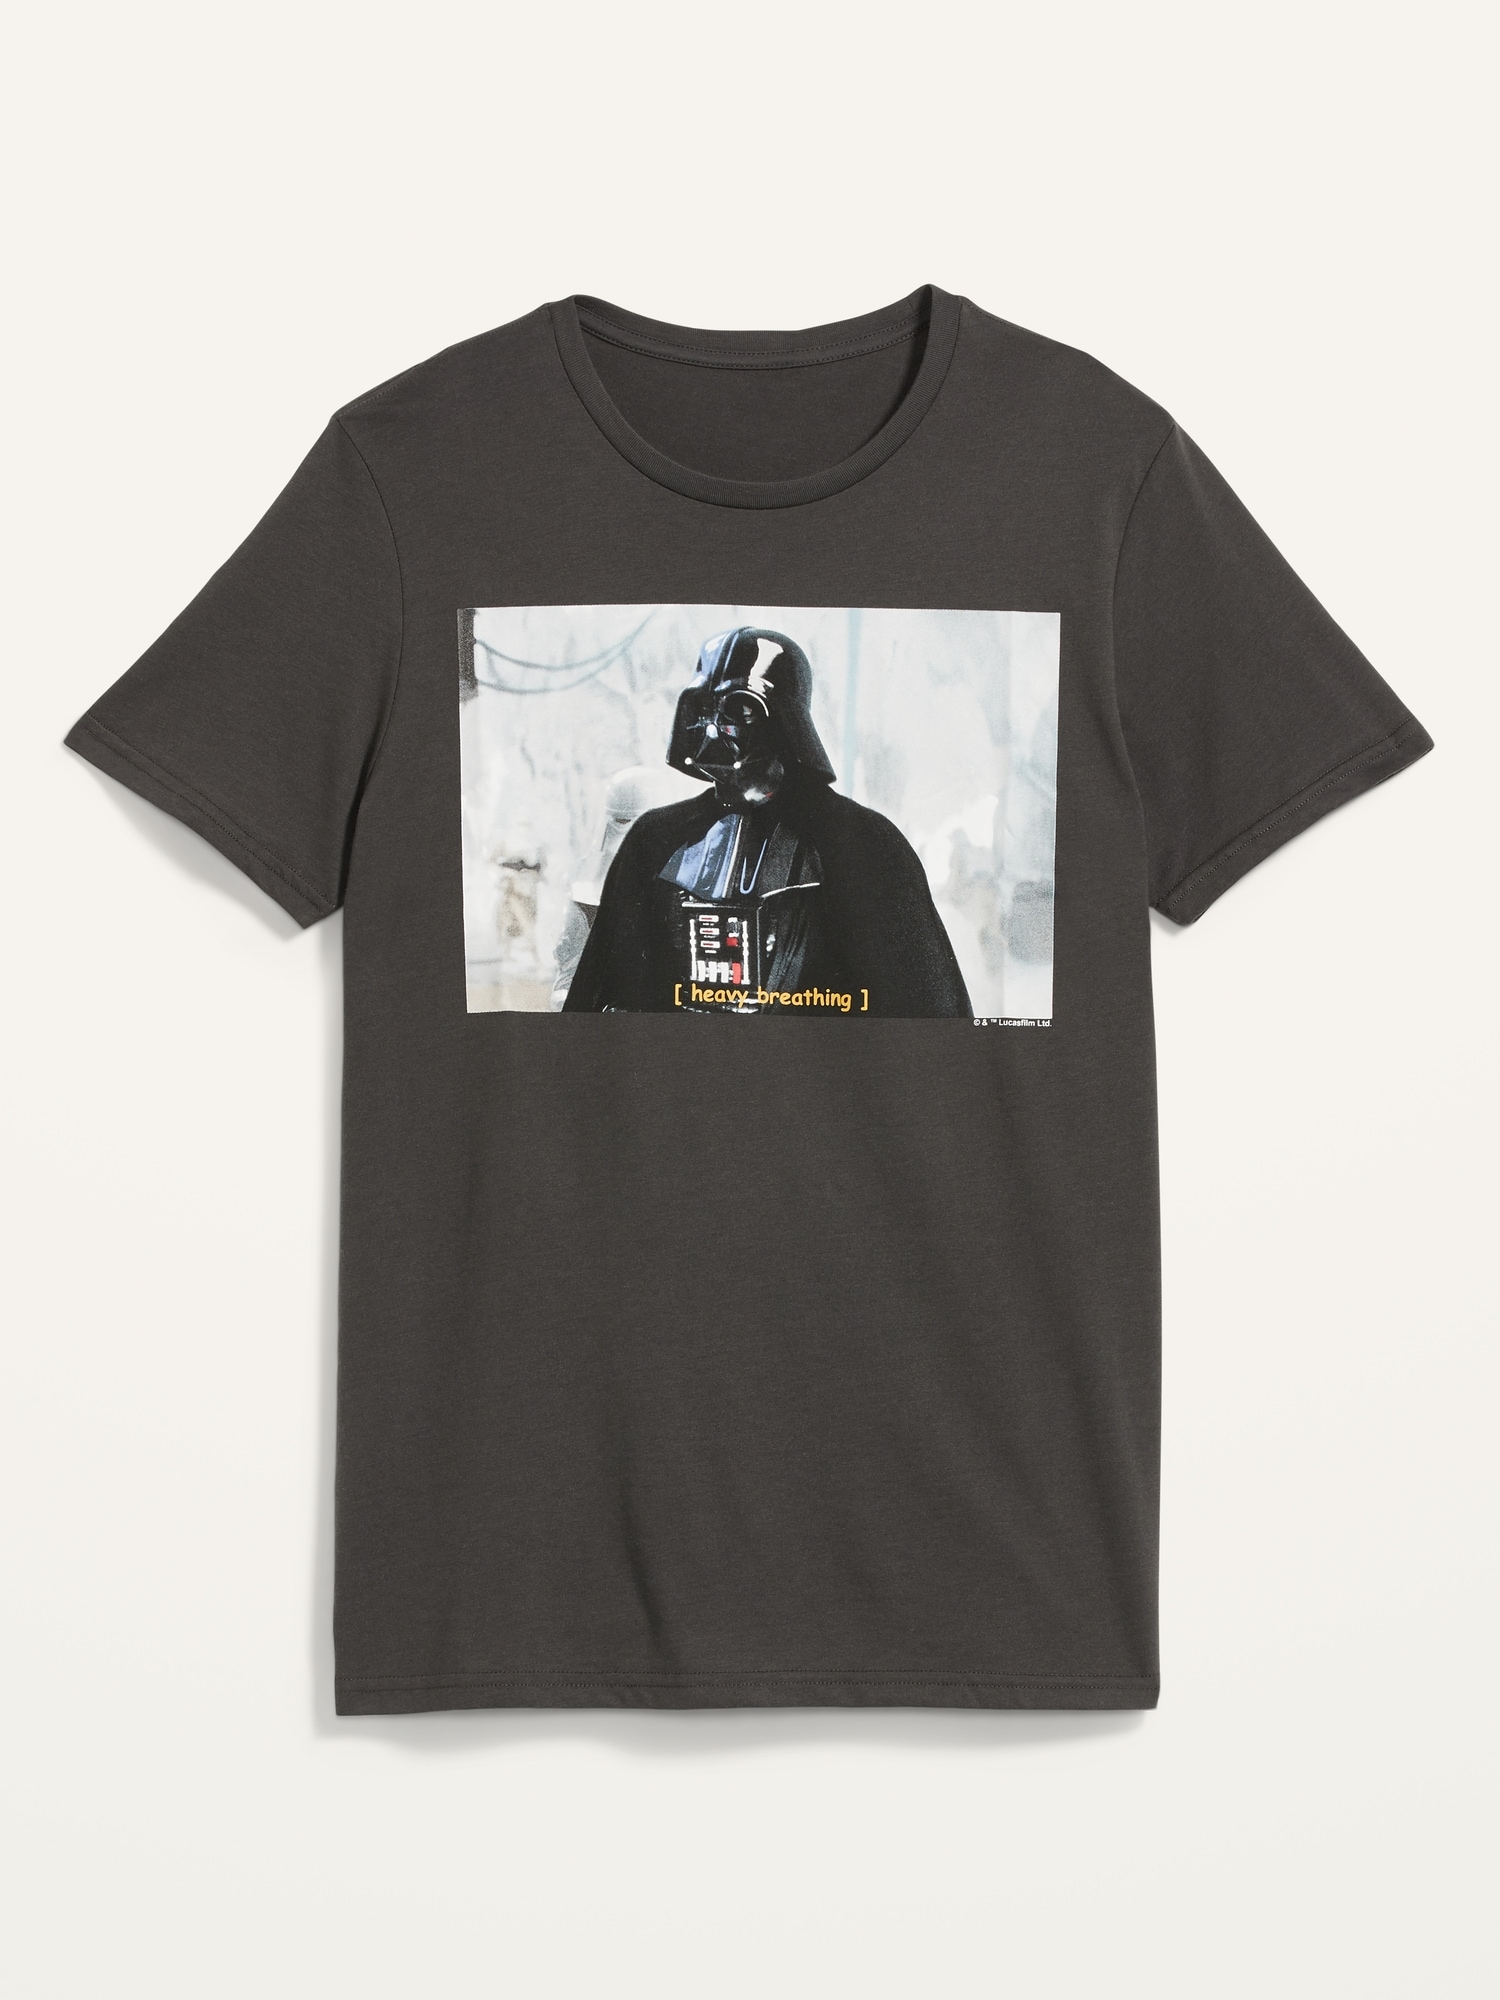 Star Wars™ Darth Vader Gender-Neutral Tee for Adults